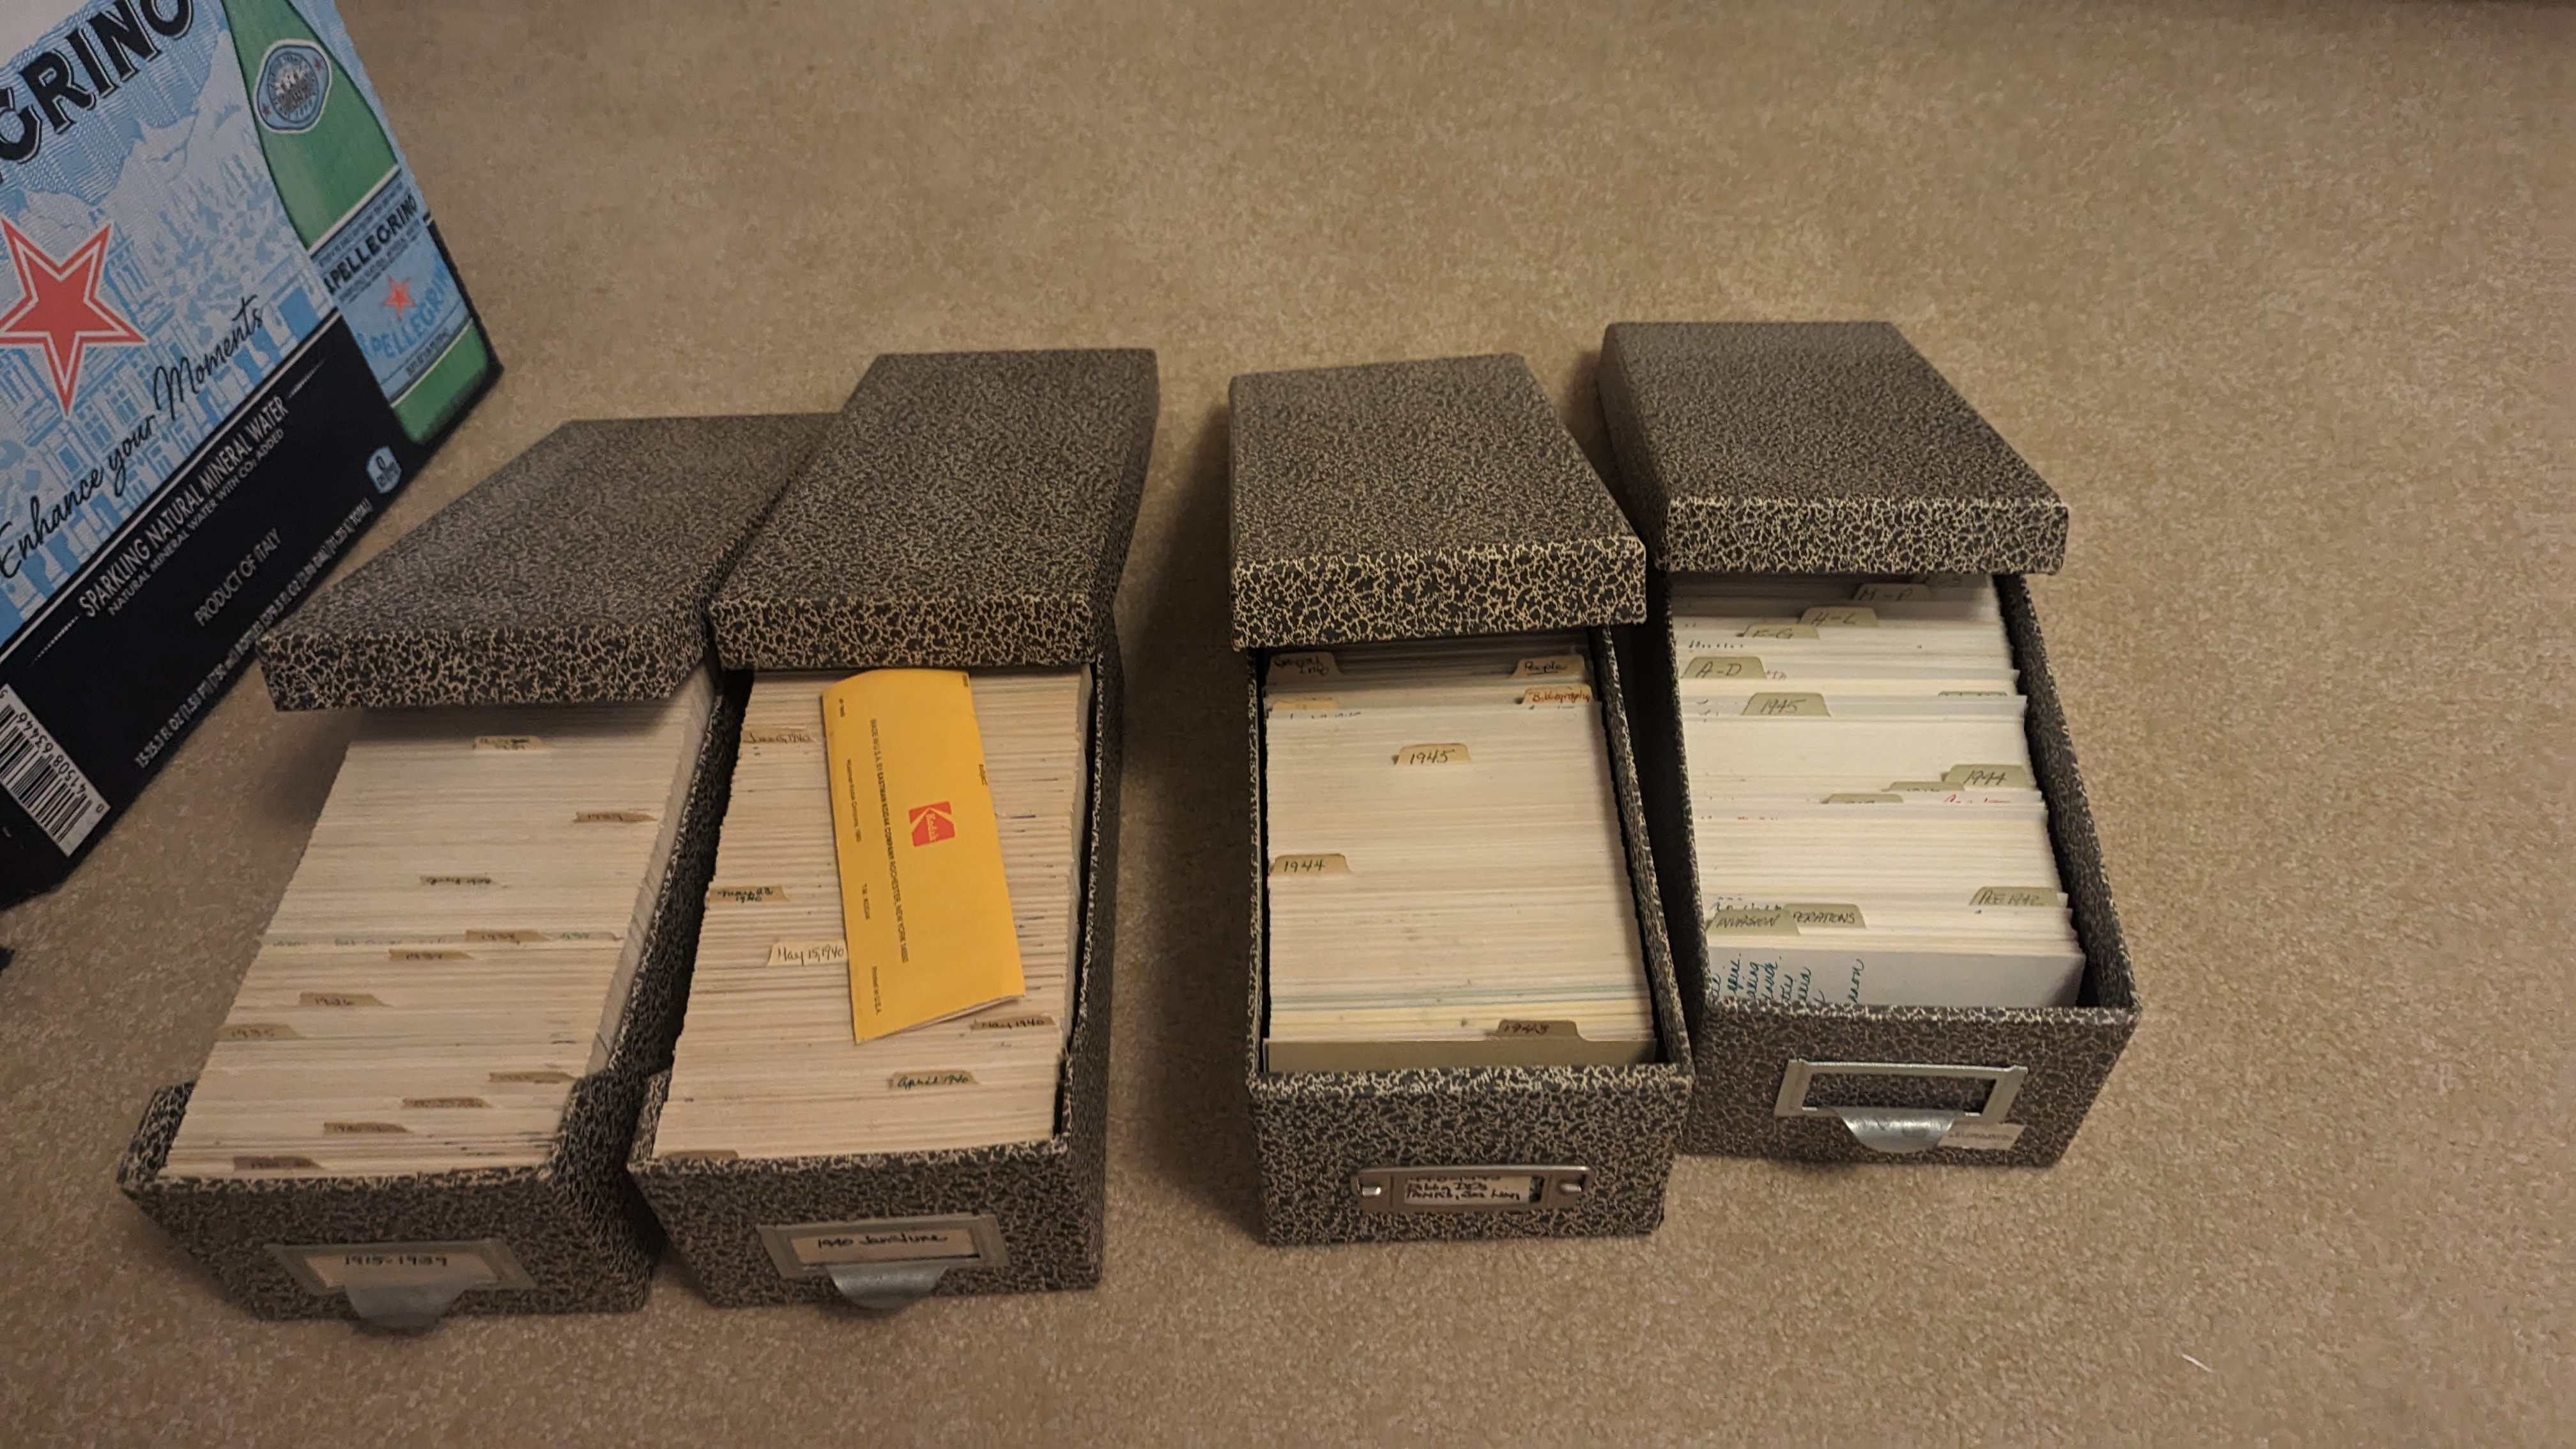 Four of many notecard boxes